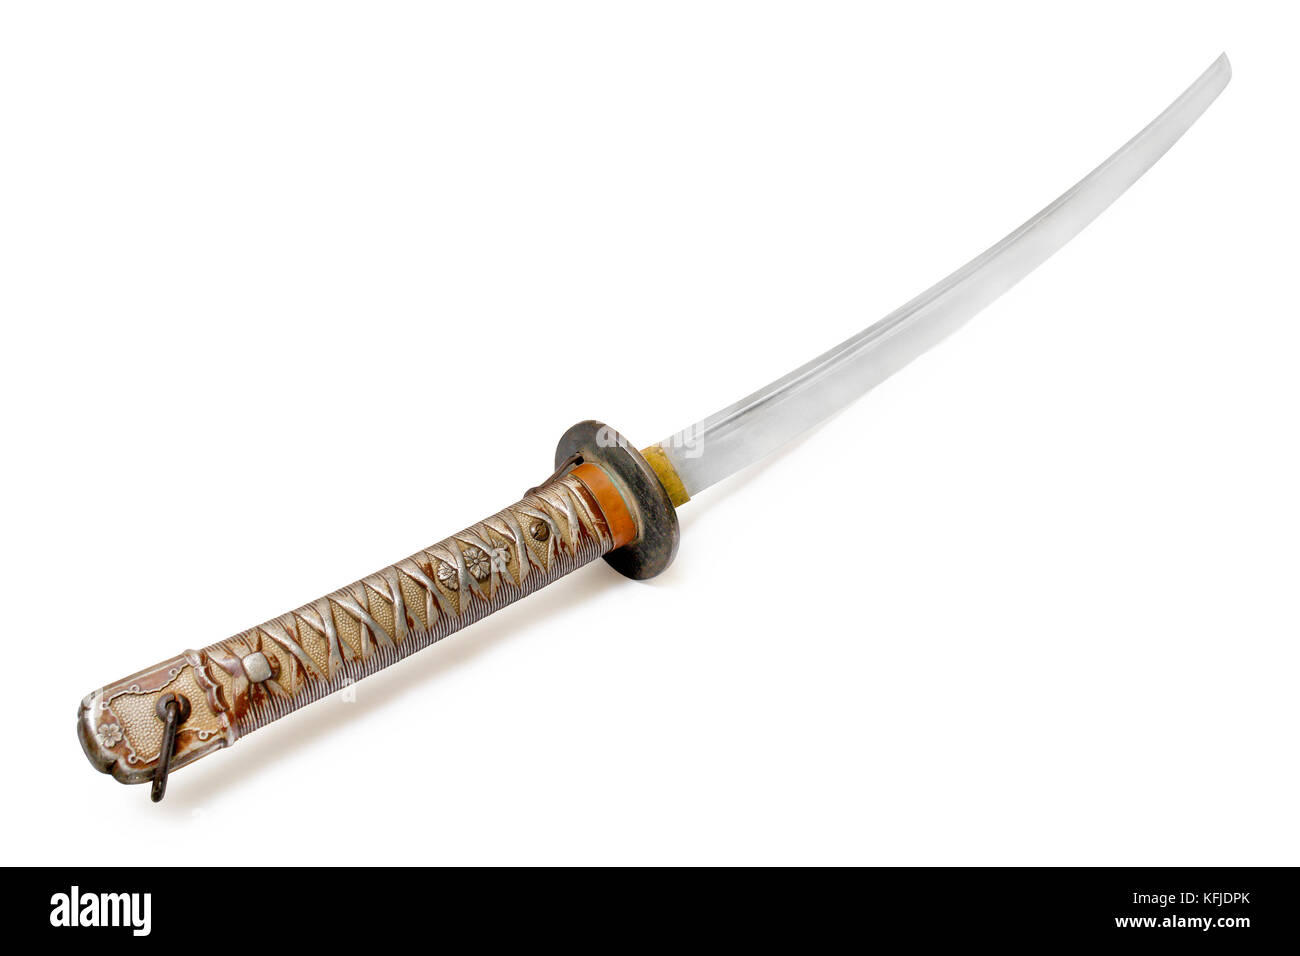 Japanese sergeant's 'new military sword (1939-44). Isolated path on the white background Stock Photo